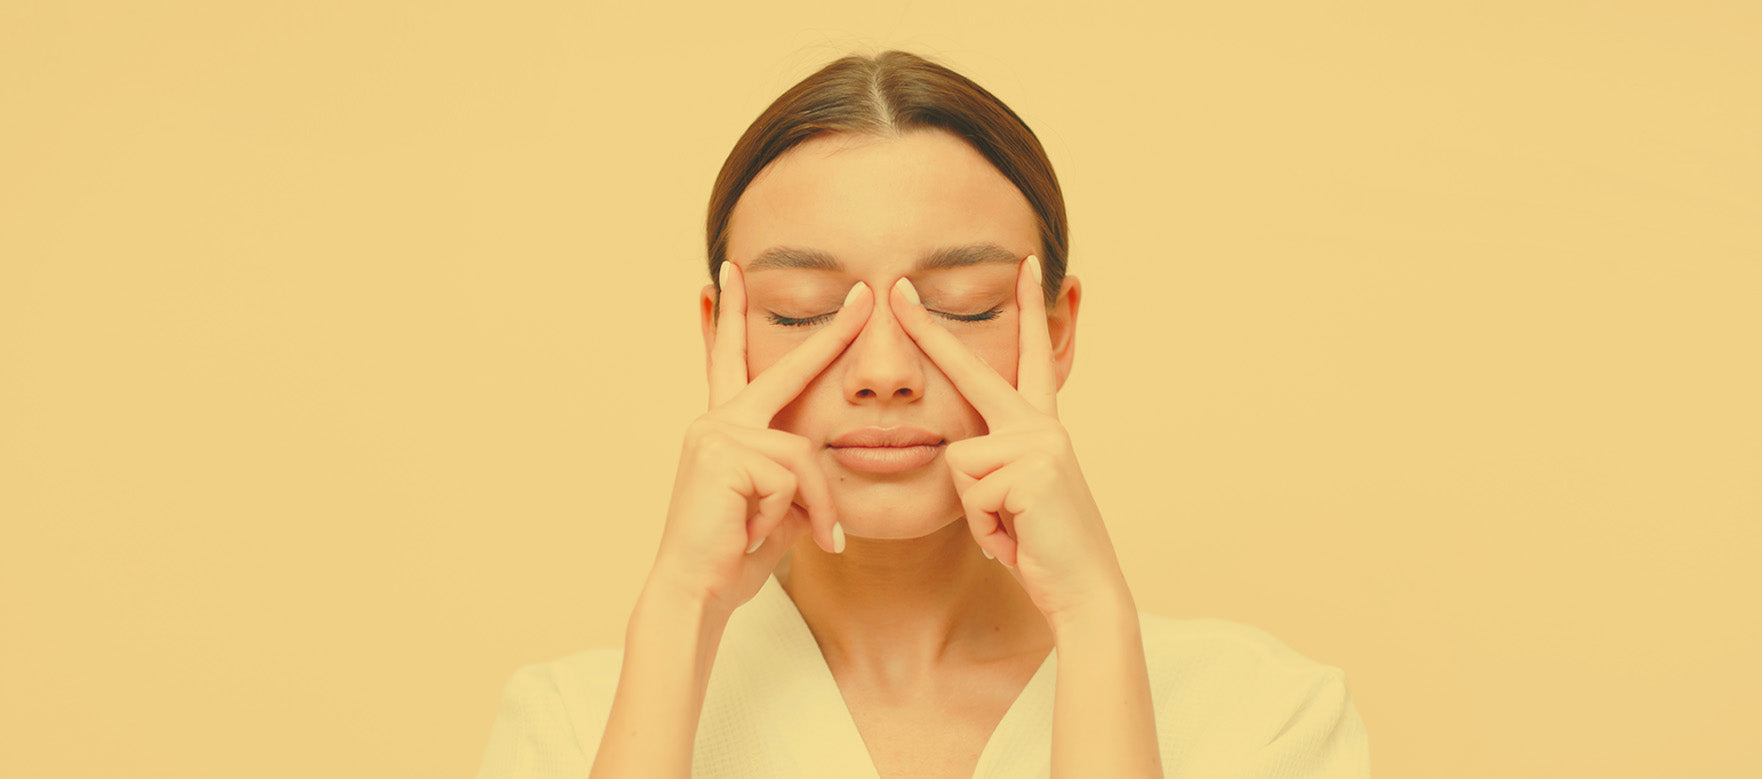 All Natural Anti-Aging:  The Benefits of Face Yoga